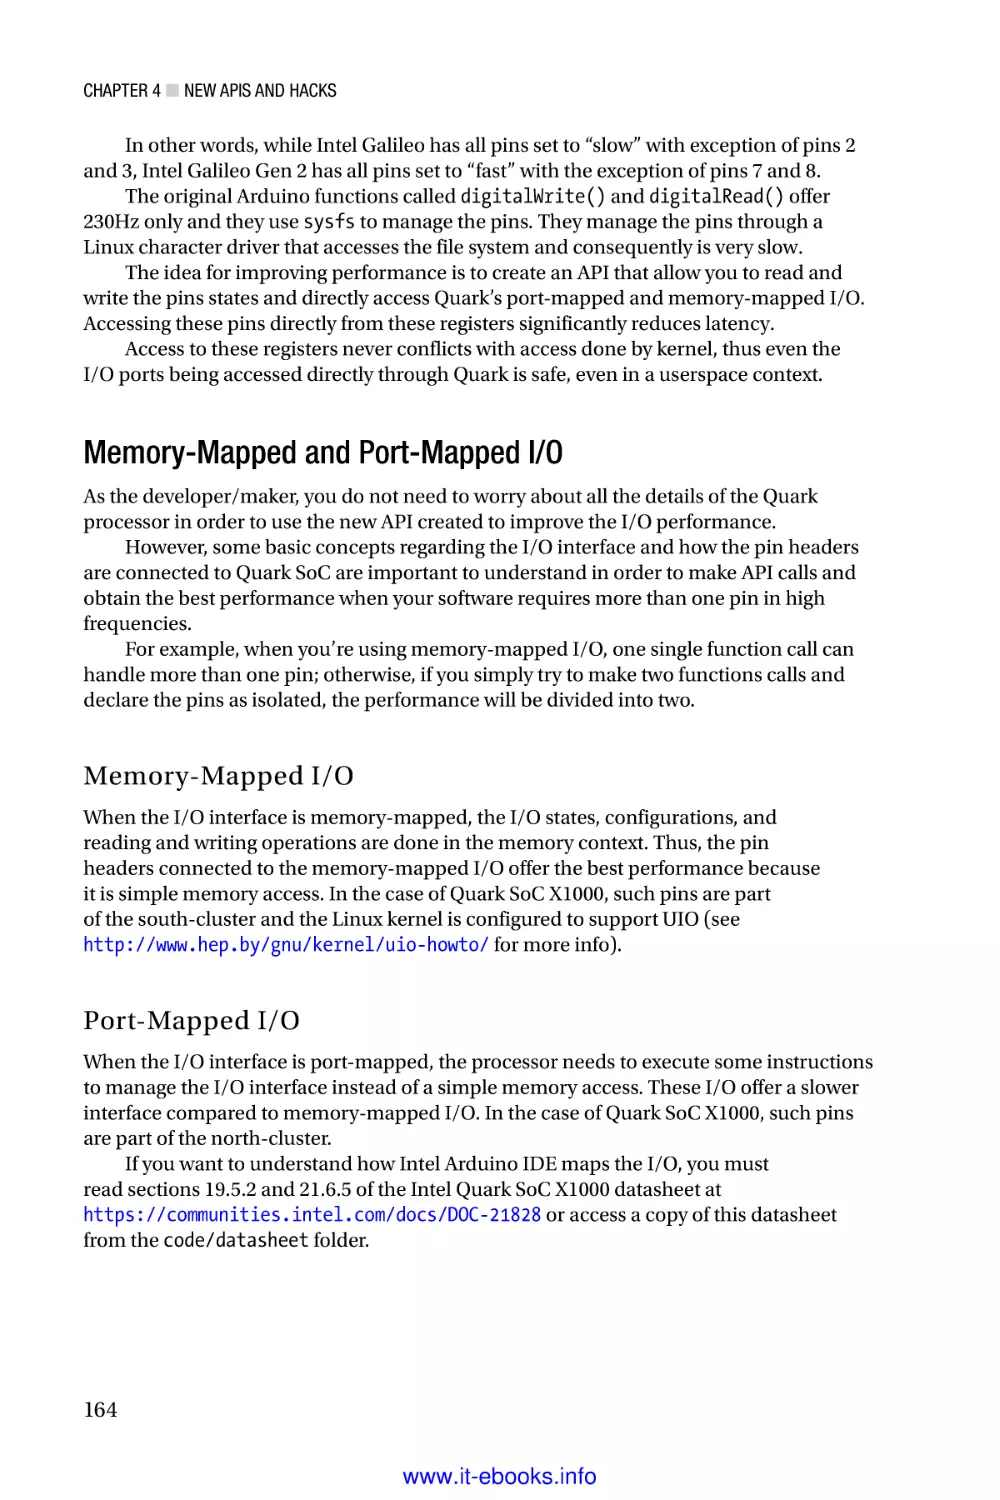 Memory-Mapped and Port-Mapped I/O
Memory-Mapped I/ O
Port-Mapped I/ O